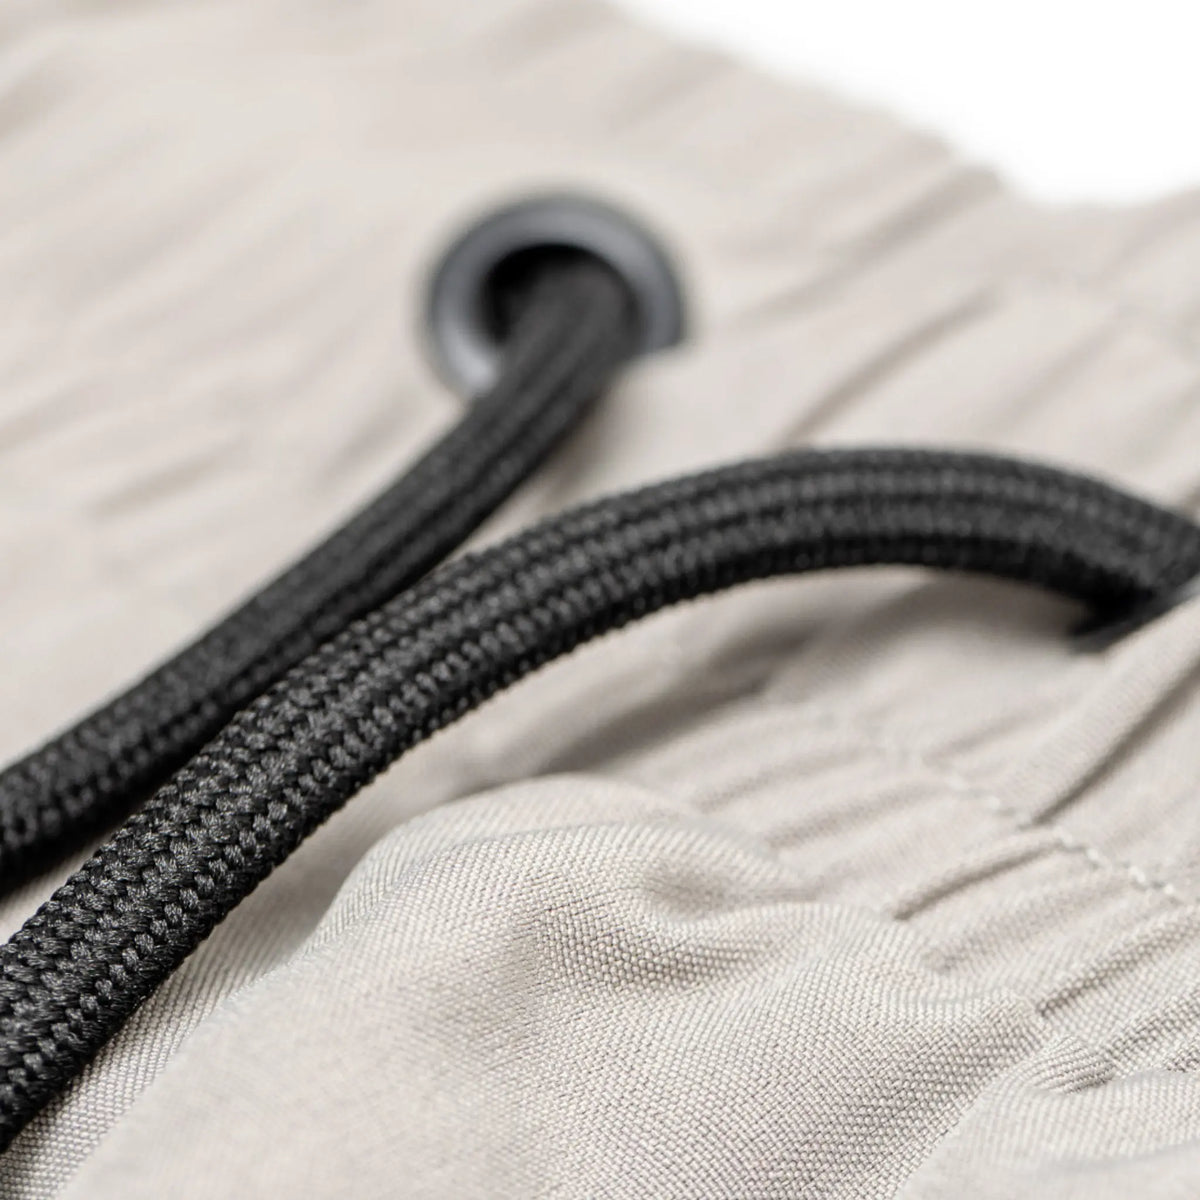 The image displays a close-up view of the drawstring detail on a pair of Tater Baseball grey shorts, highlighting the textured fabric and the quality of the eyelet and cord.